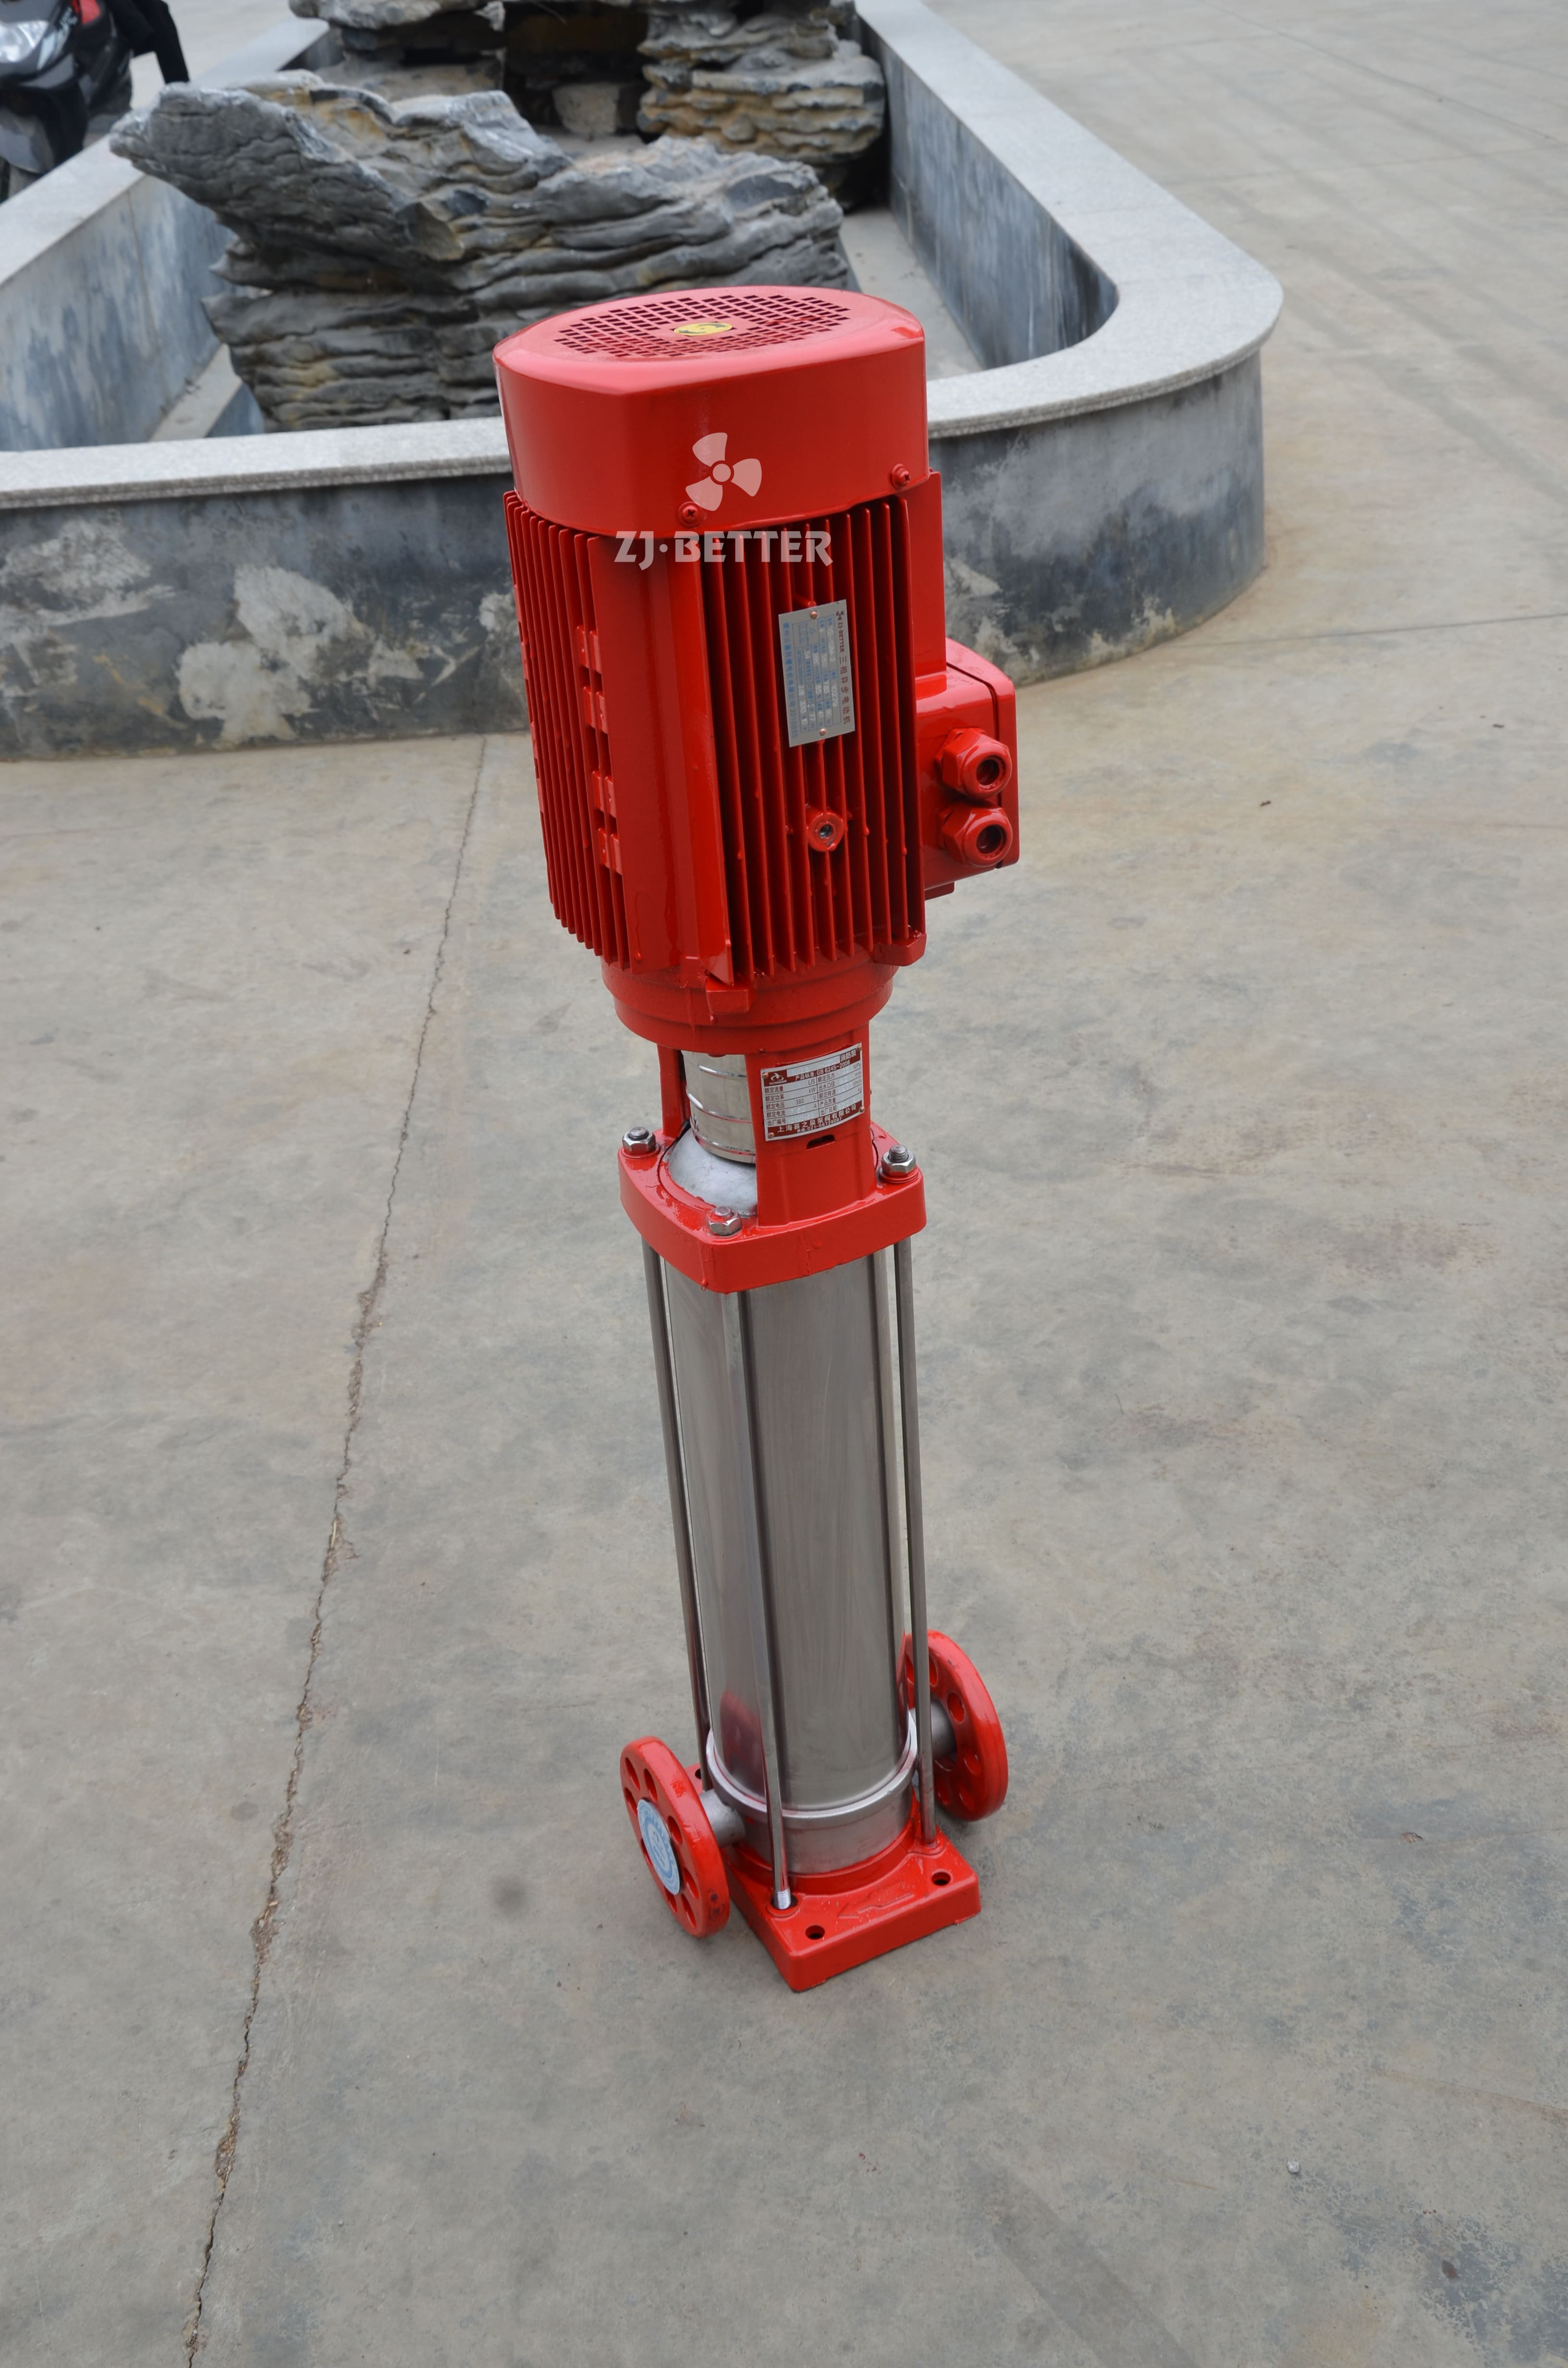 The jockey pump-Balancer of fire protection system